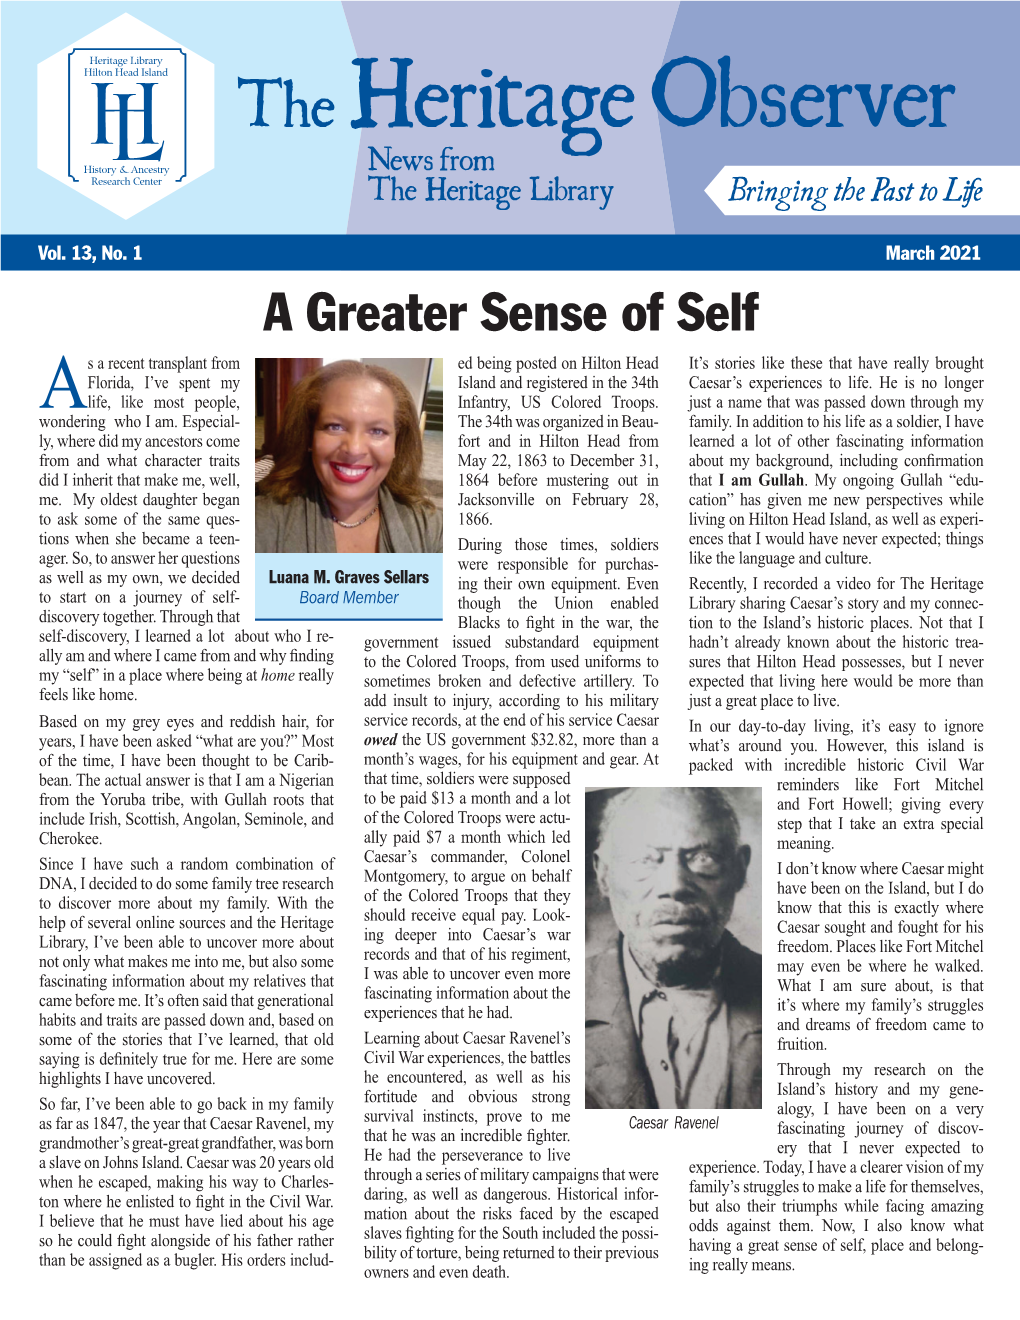 The Heritage Observer, March 2021